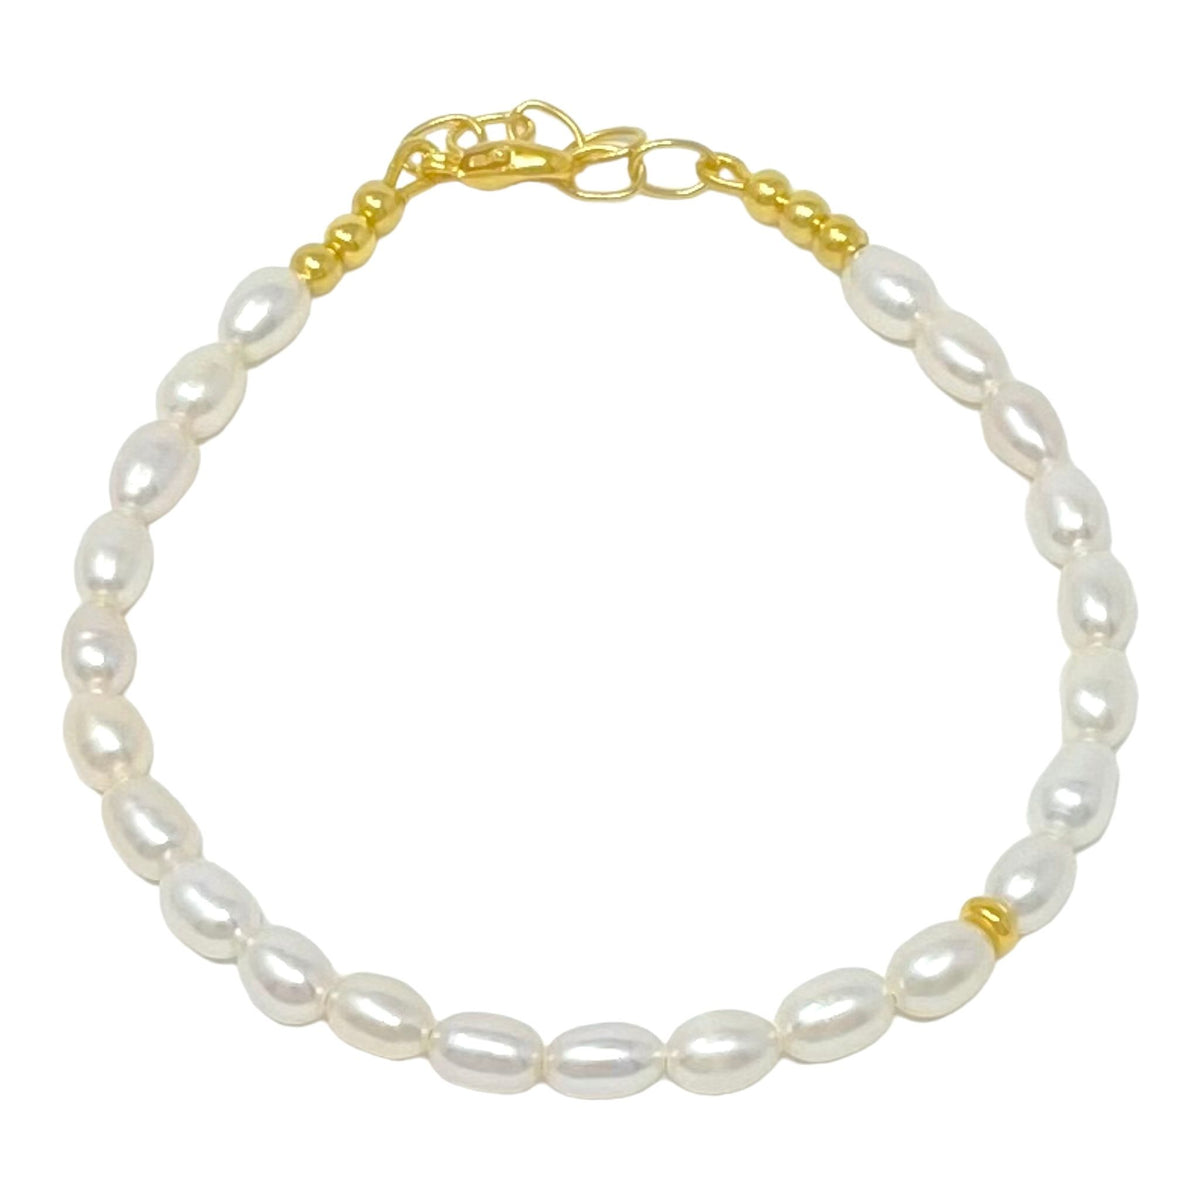 Freshwater Pearl and Gold Bead Bracelet